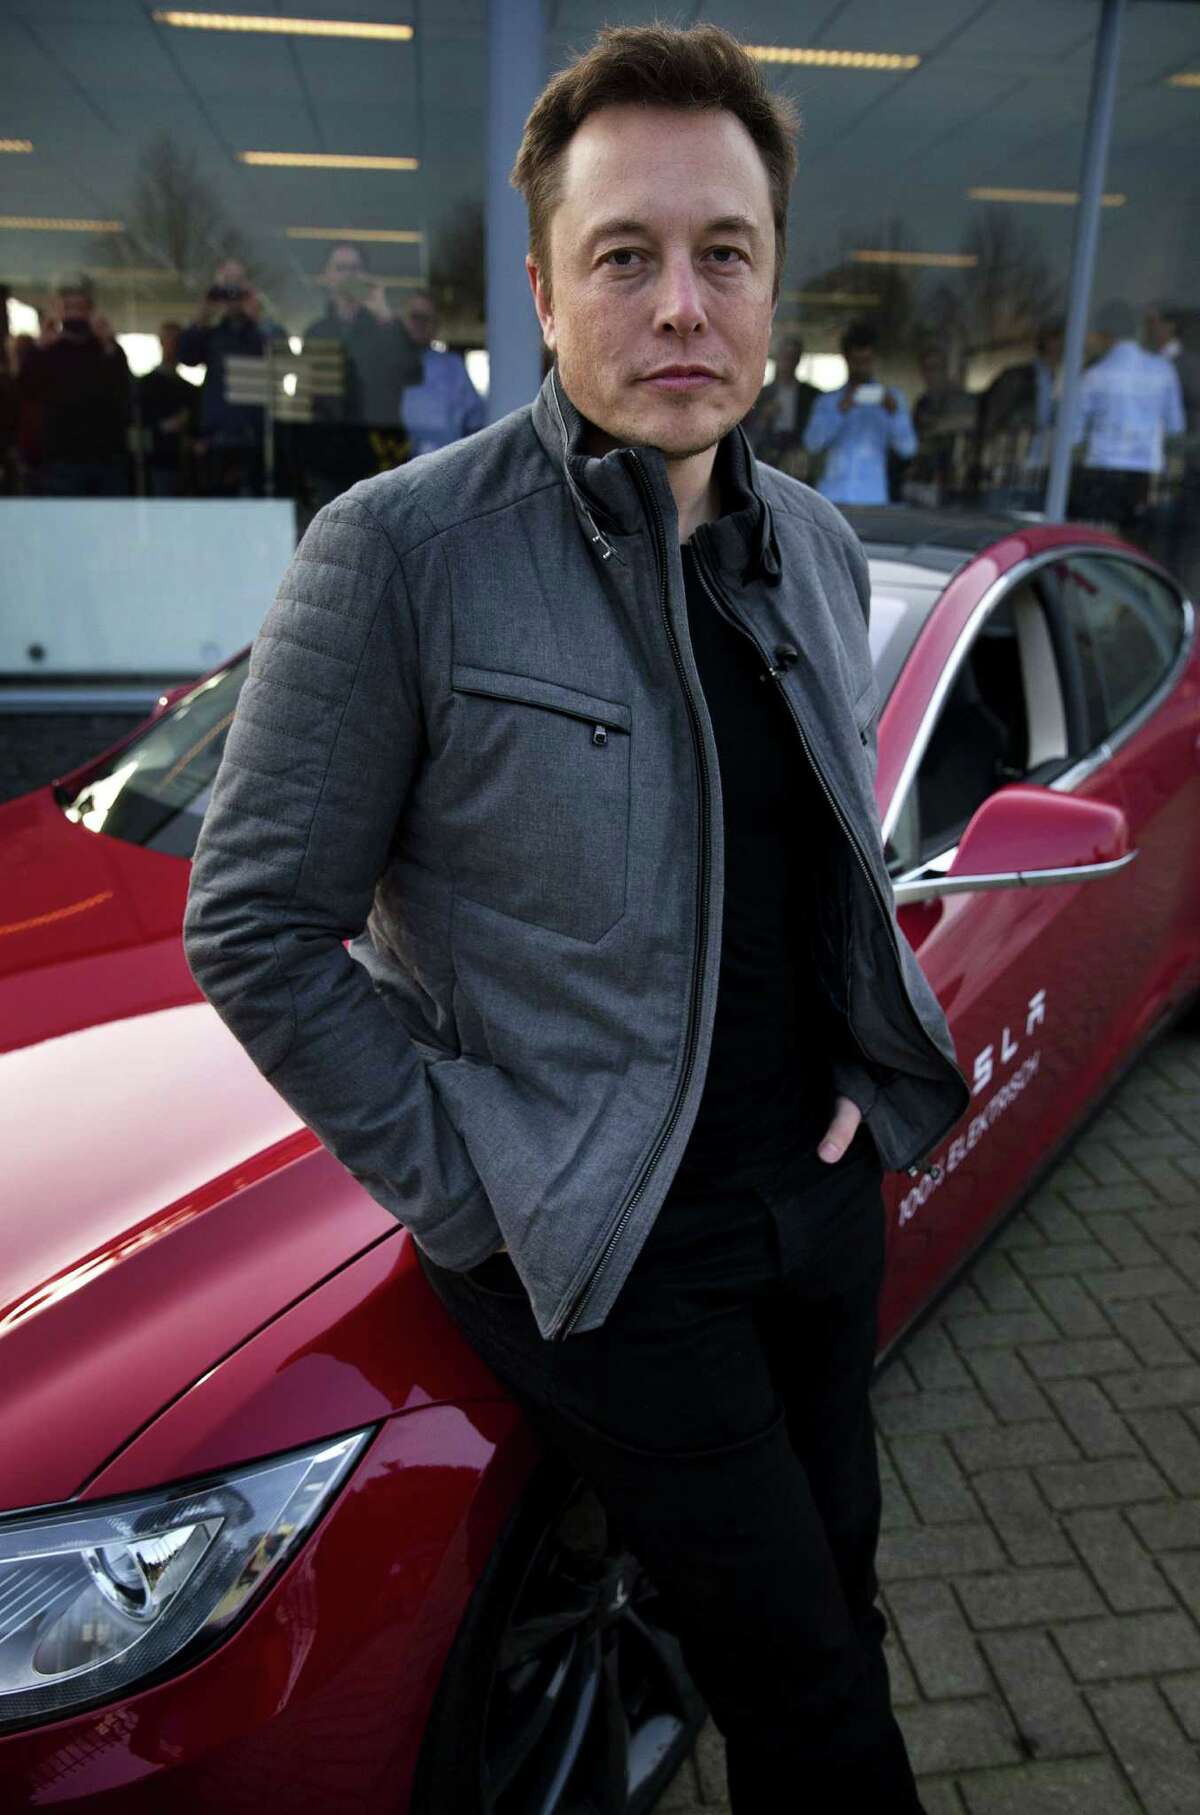 Elon Musk, co-founder and CEO of American electric vehicle manufacturer Tesla Motors, poses with a Tesla during a visit to Amsterdam on January 31, 2014. The European Tesla Service is based in Tilburg and the European headquarters is in Amsterdam. AFP PHOTO / ANP/ JERRY LAMPEN --NETHERLANDS OUT--JERRY LAMPEN/AFP/Getty Images